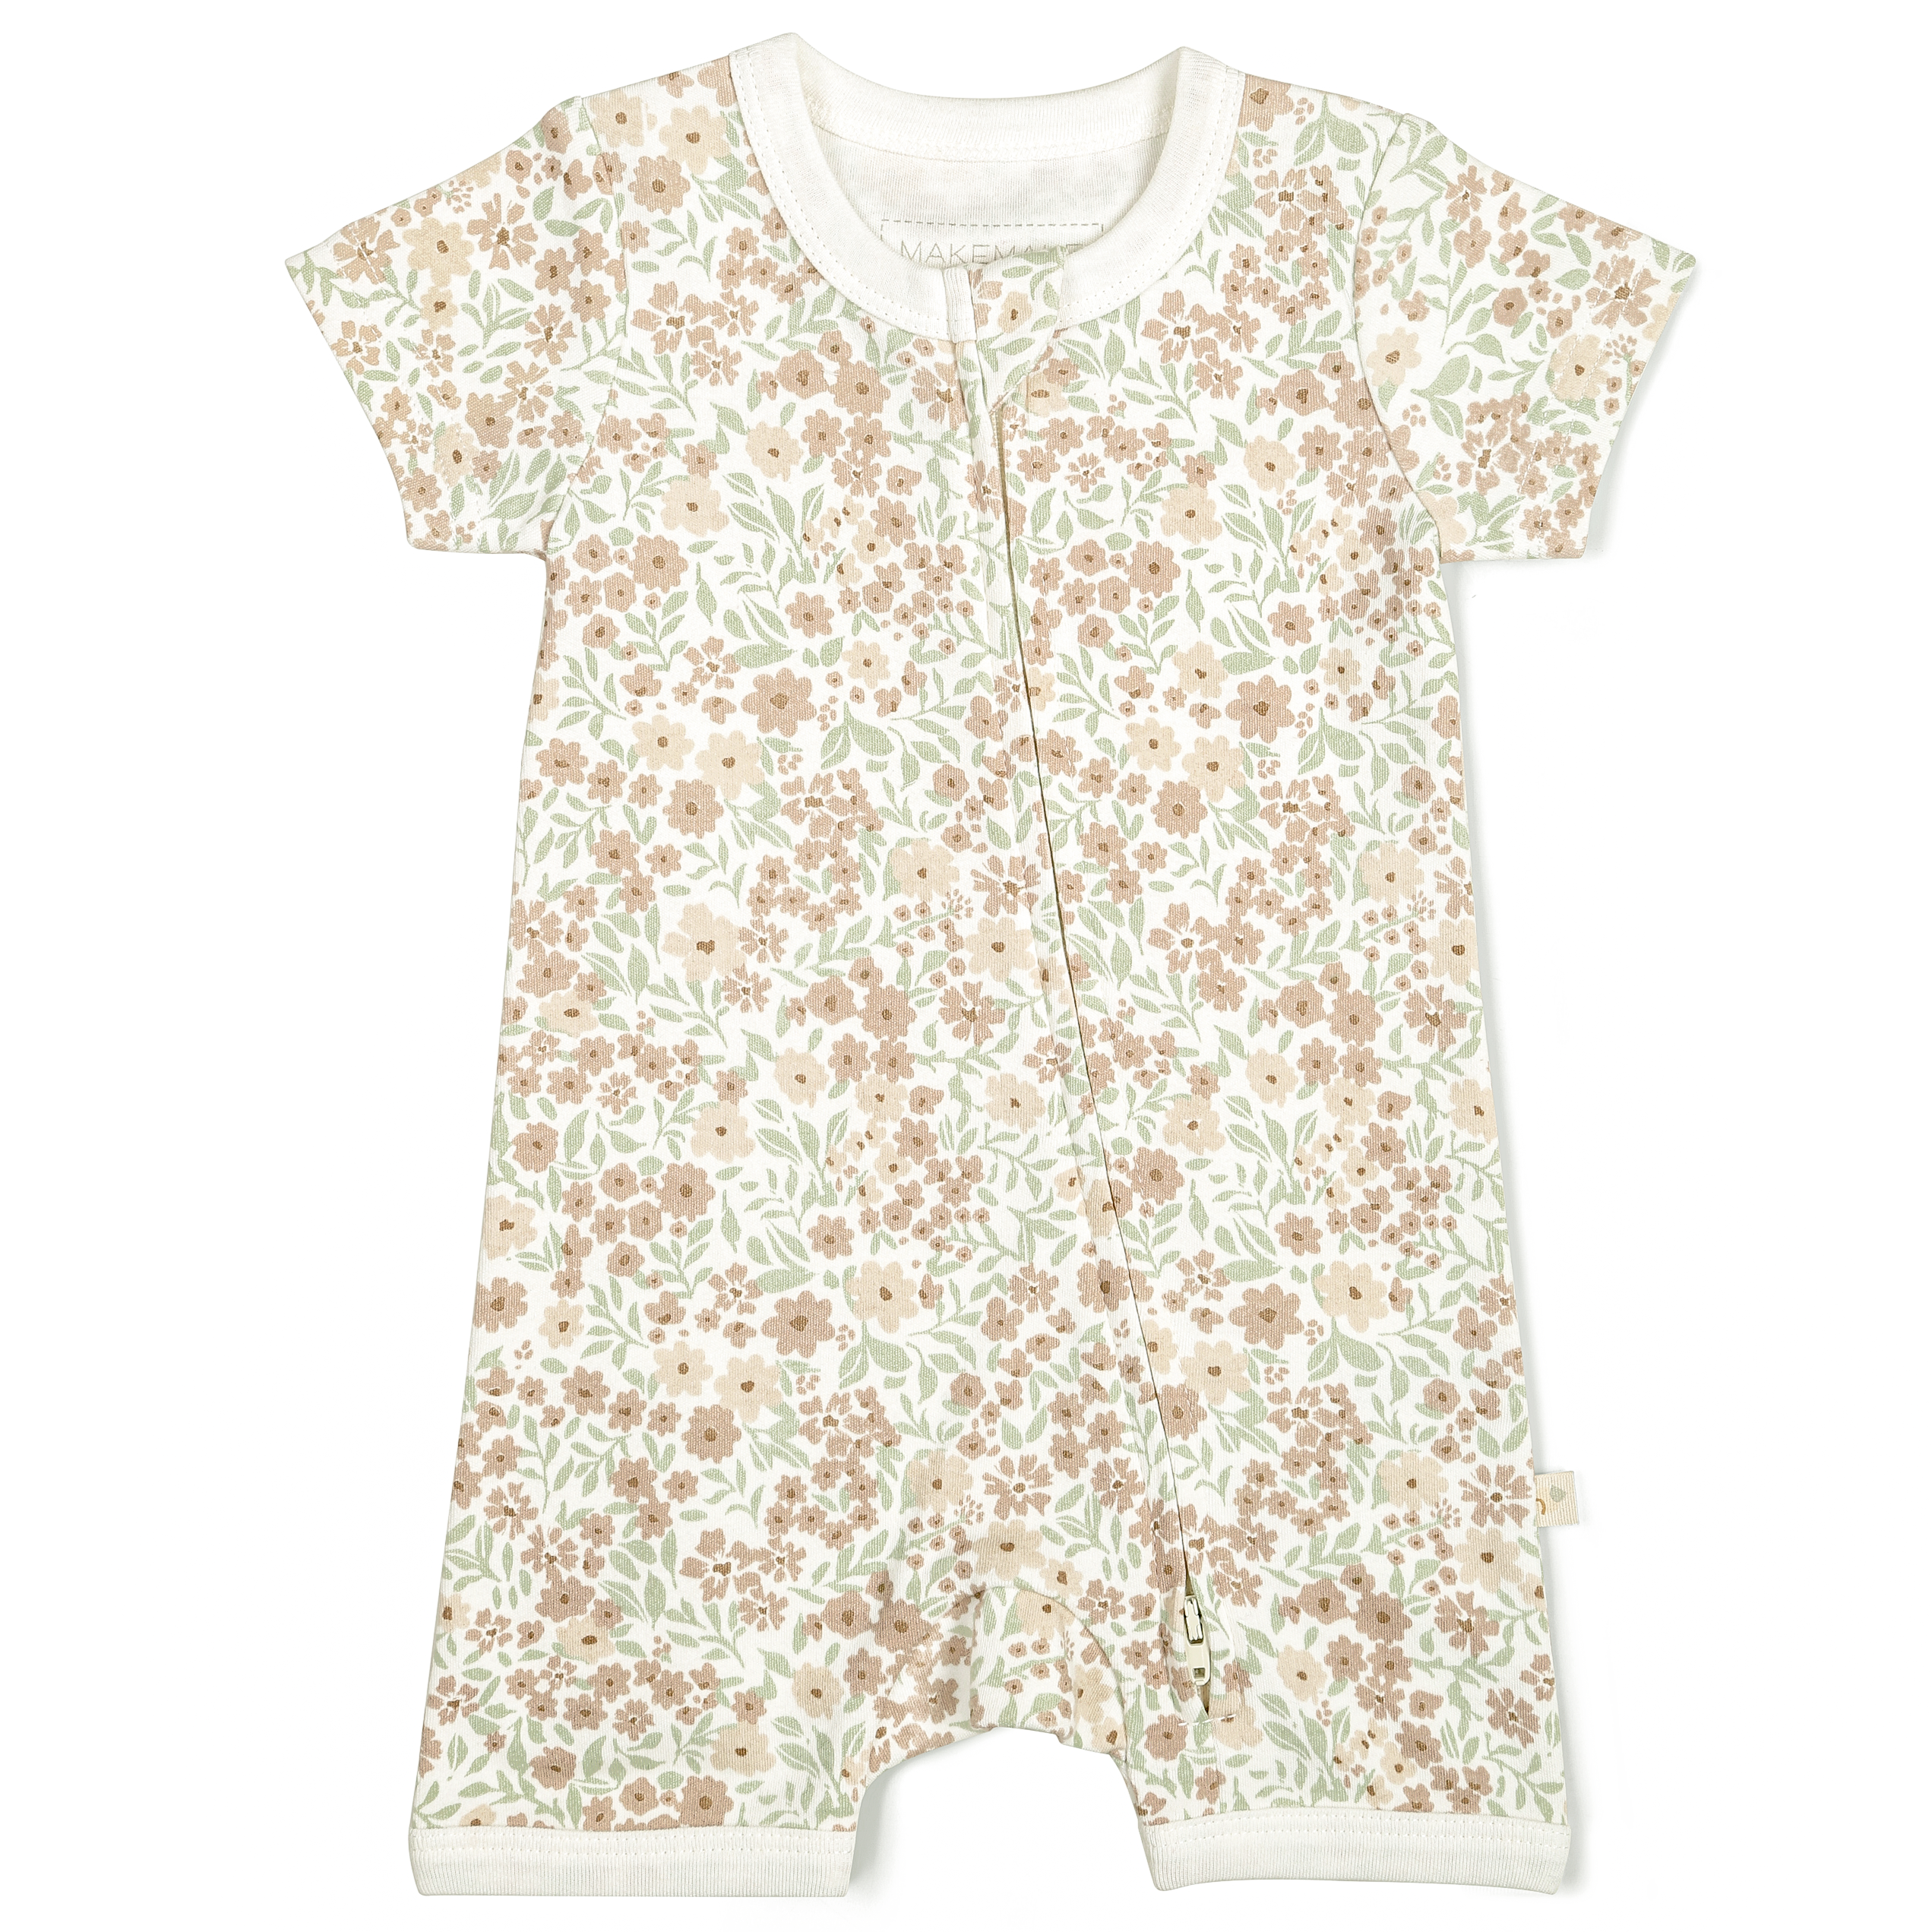 An Organic Short Zip Romper - Summer Floral infant onesie from Makemake Organics, with a floral pattern in shades of beige, brown, and green, featuring short sleeves and a front zipper, laid flat on a white background. Suitable for a baby girl.